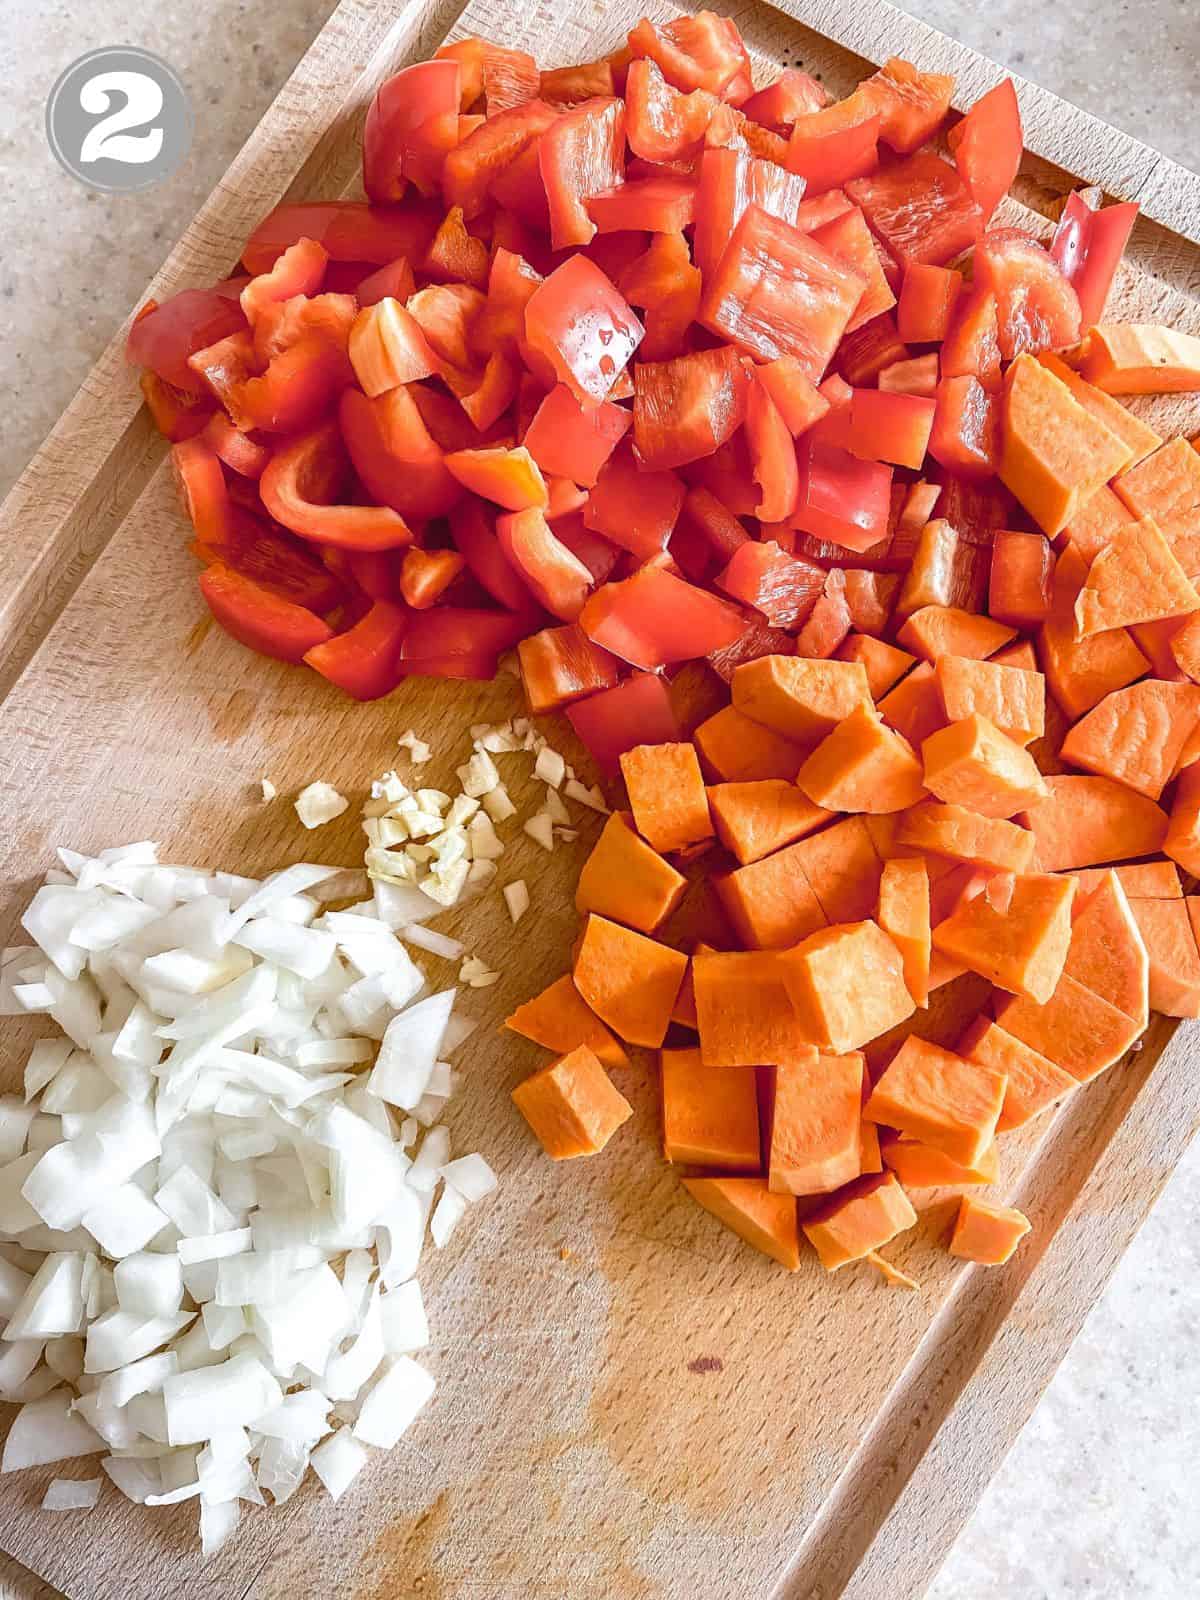 diced onion, garlic, bell pepper and sweet potato on a wooden board labelled number two.